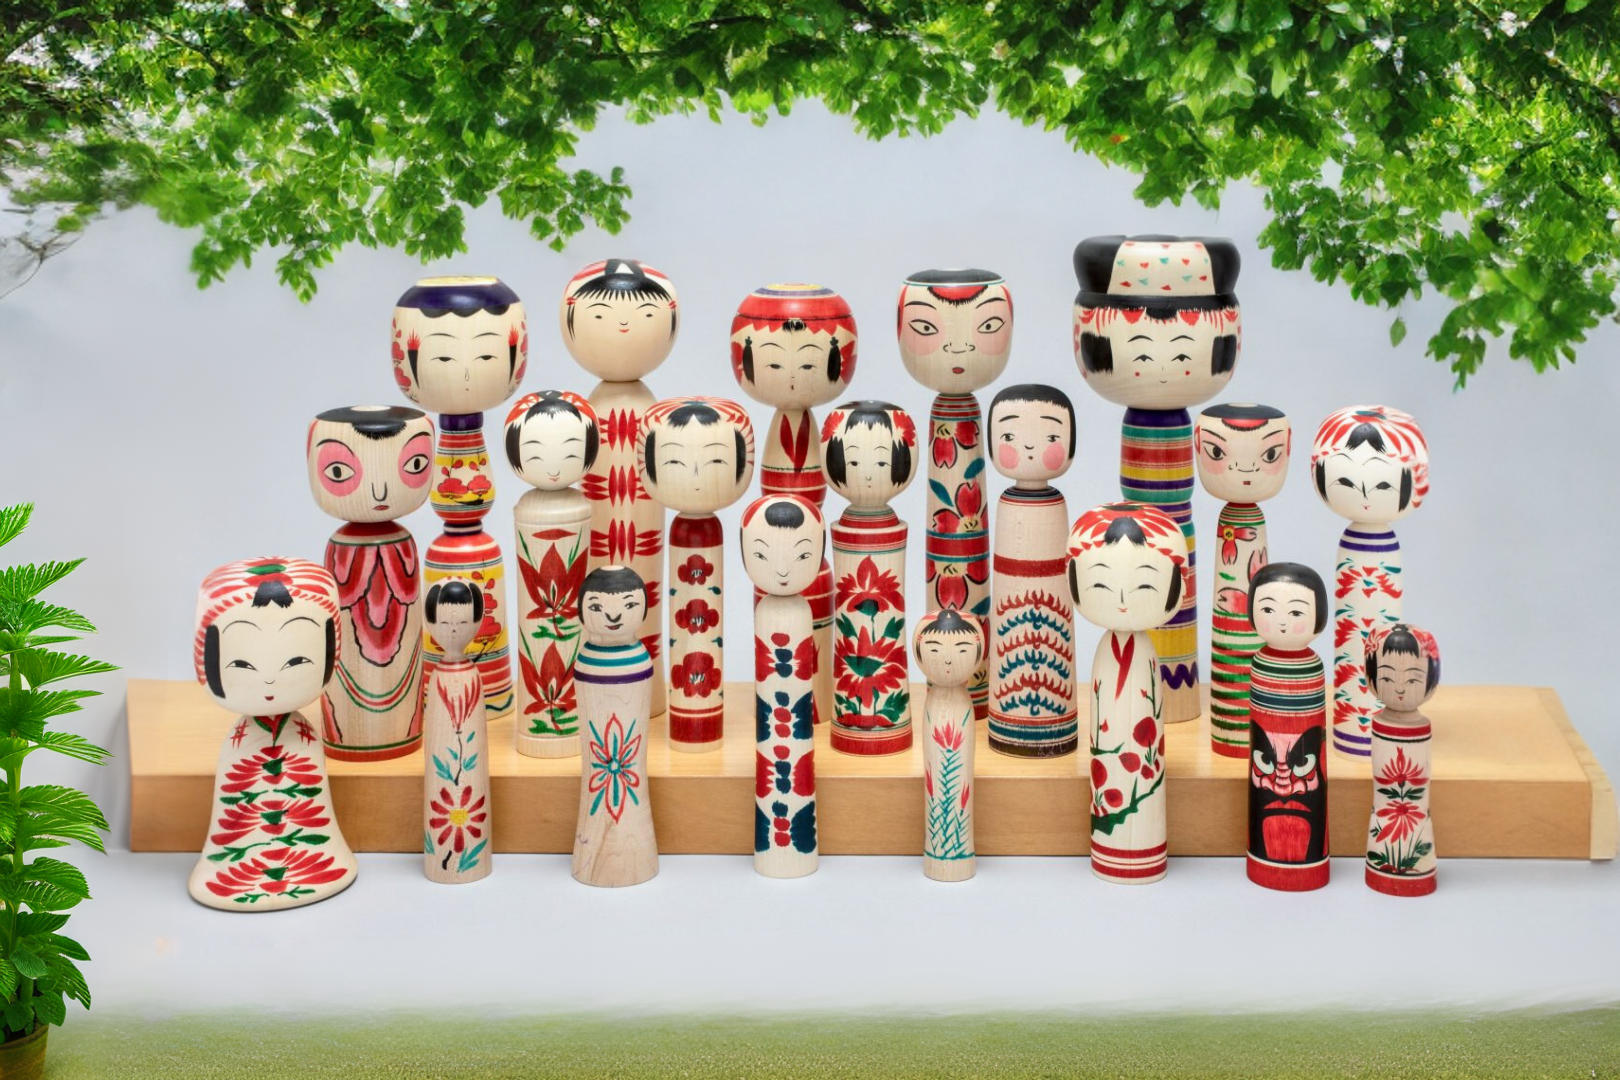 A stunning gathering of traditional kokeshi dolls, capturing the beauty of their handcrafted wooden forms and traditional motifs.